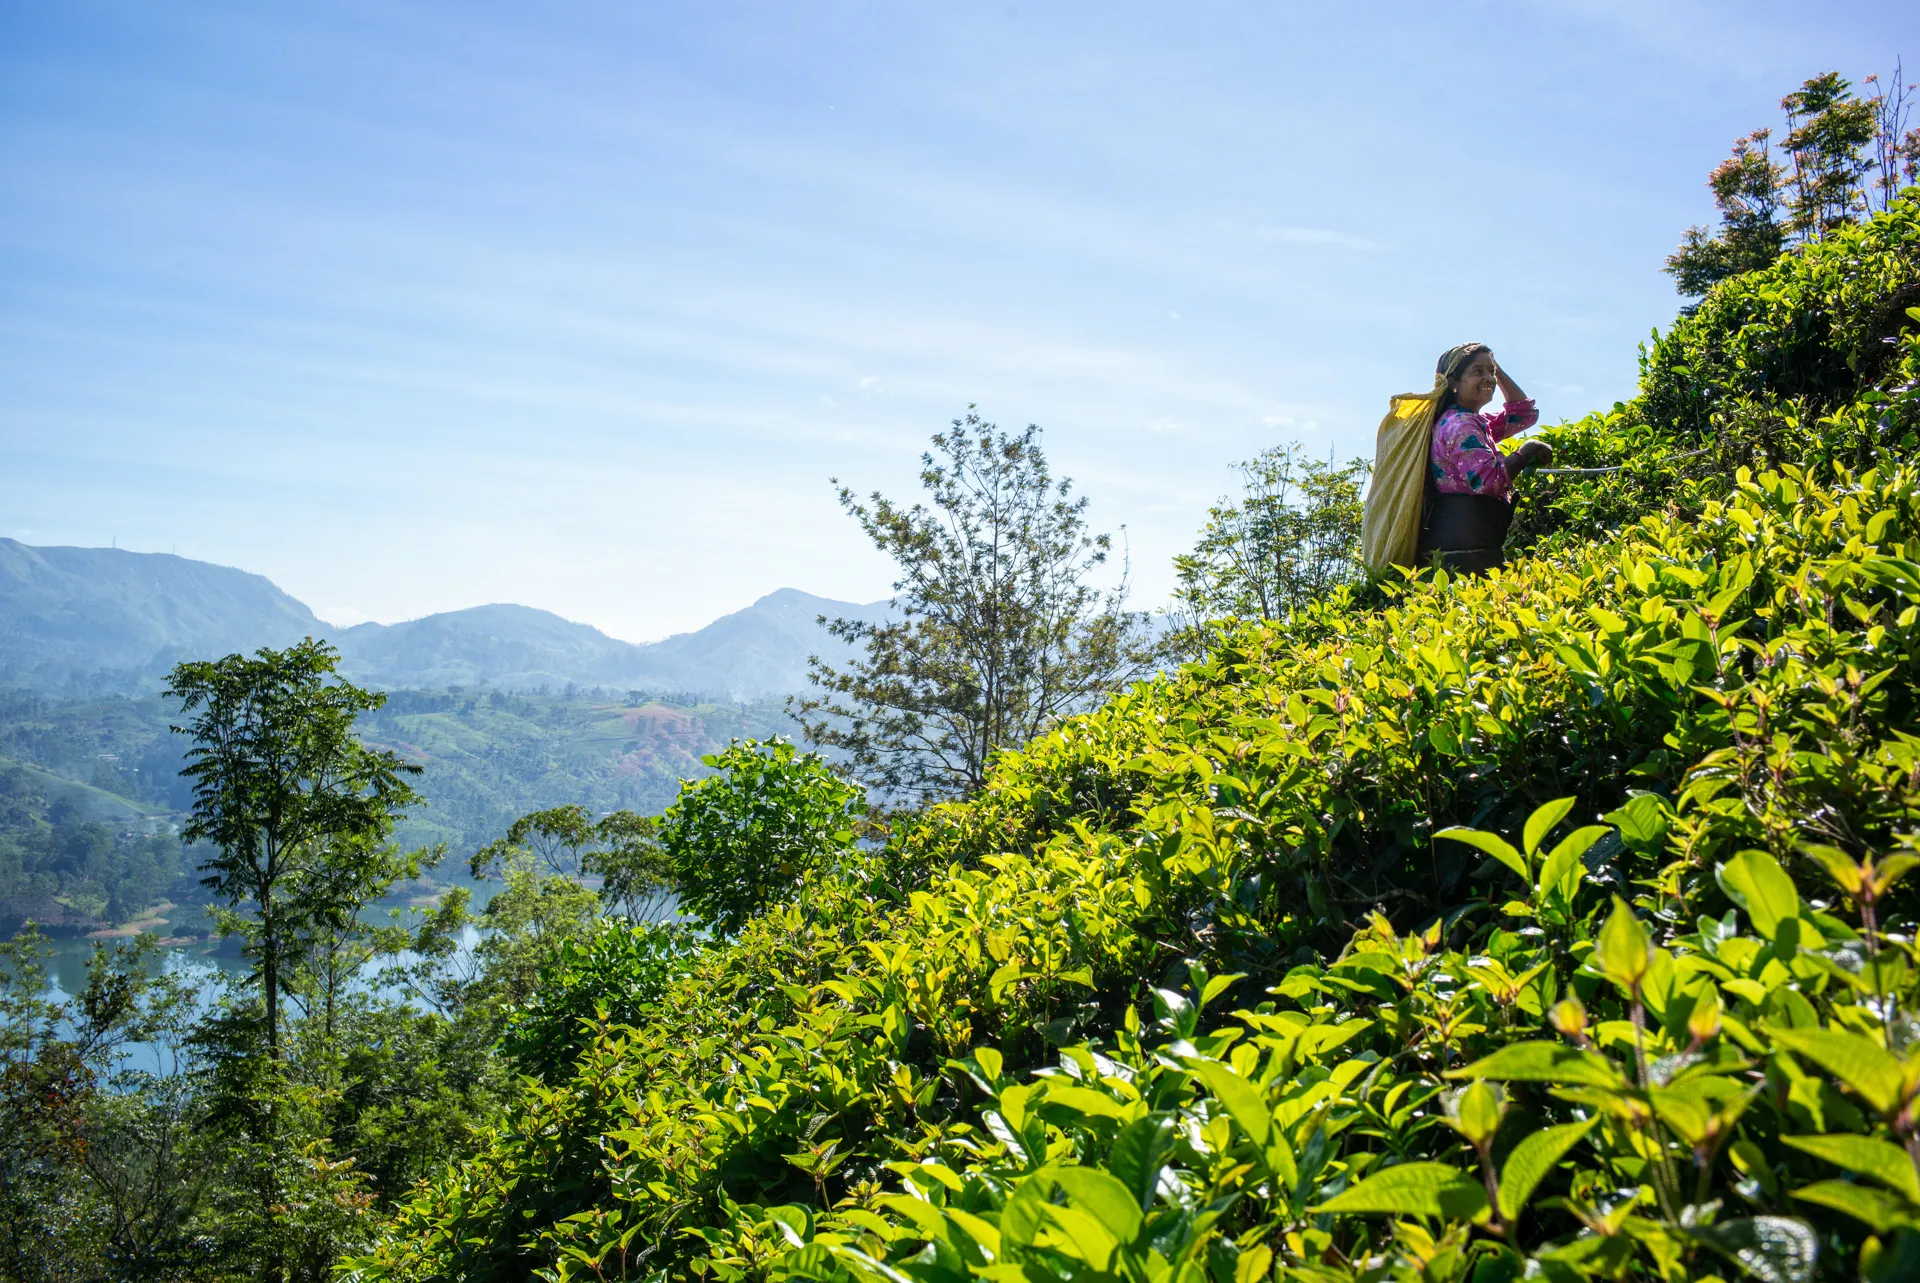 View of the hills of the Dunkeld tea estate with a tea picker at work